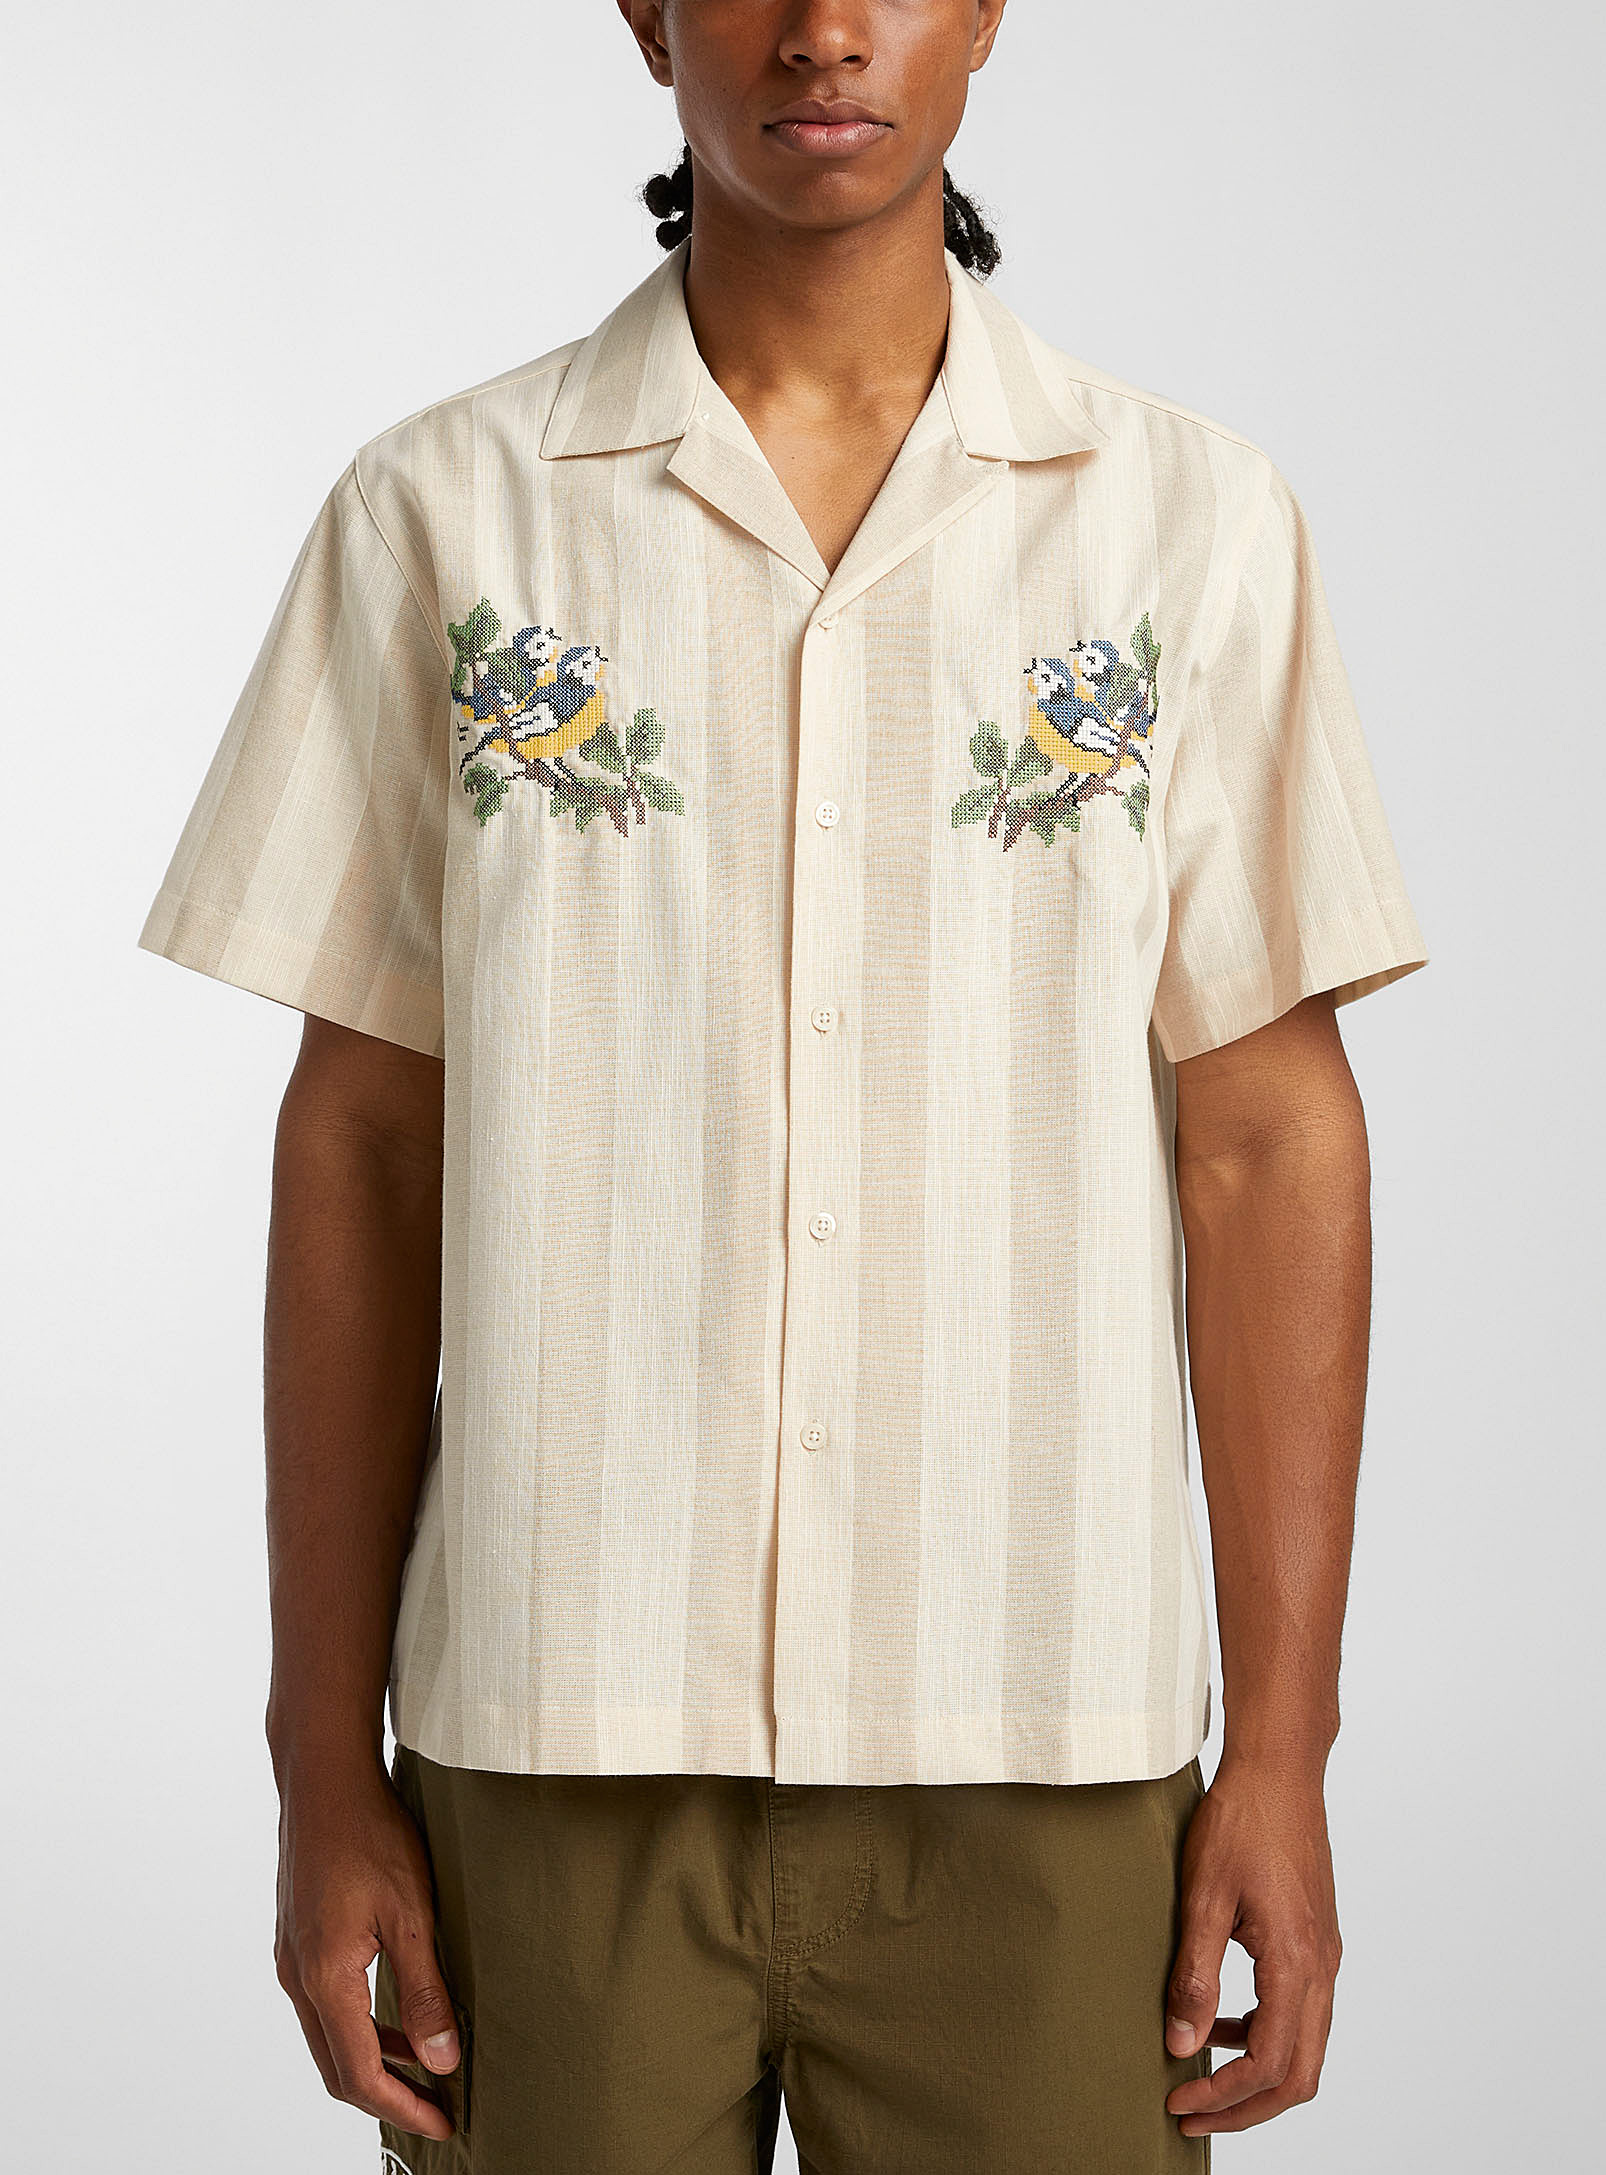 Carne Bollente Embroidered Birds Shirt In Patterned White